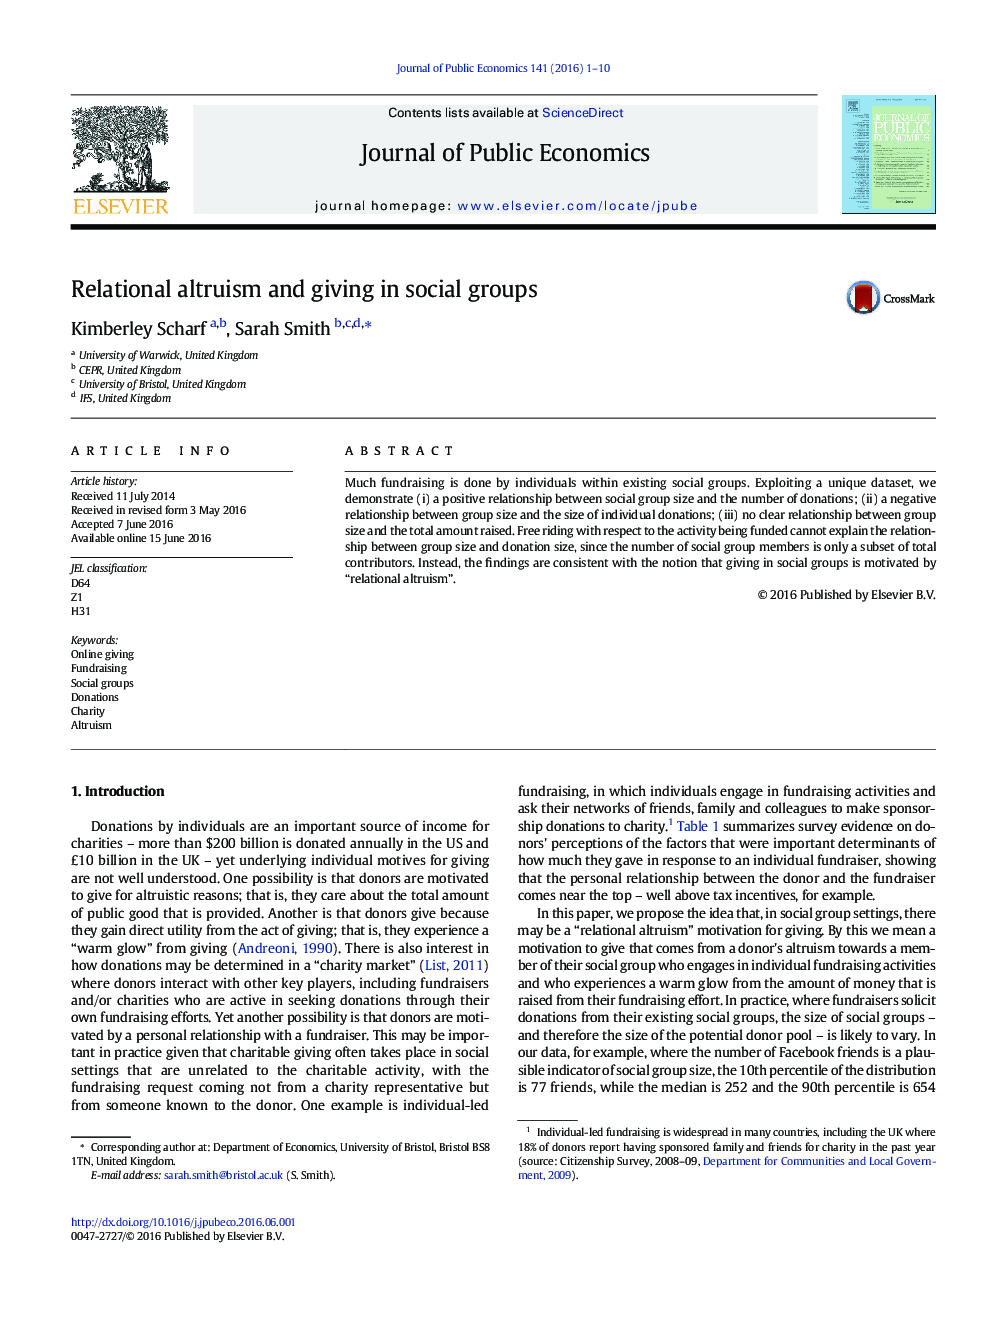 Relational altruism and giving in social groups